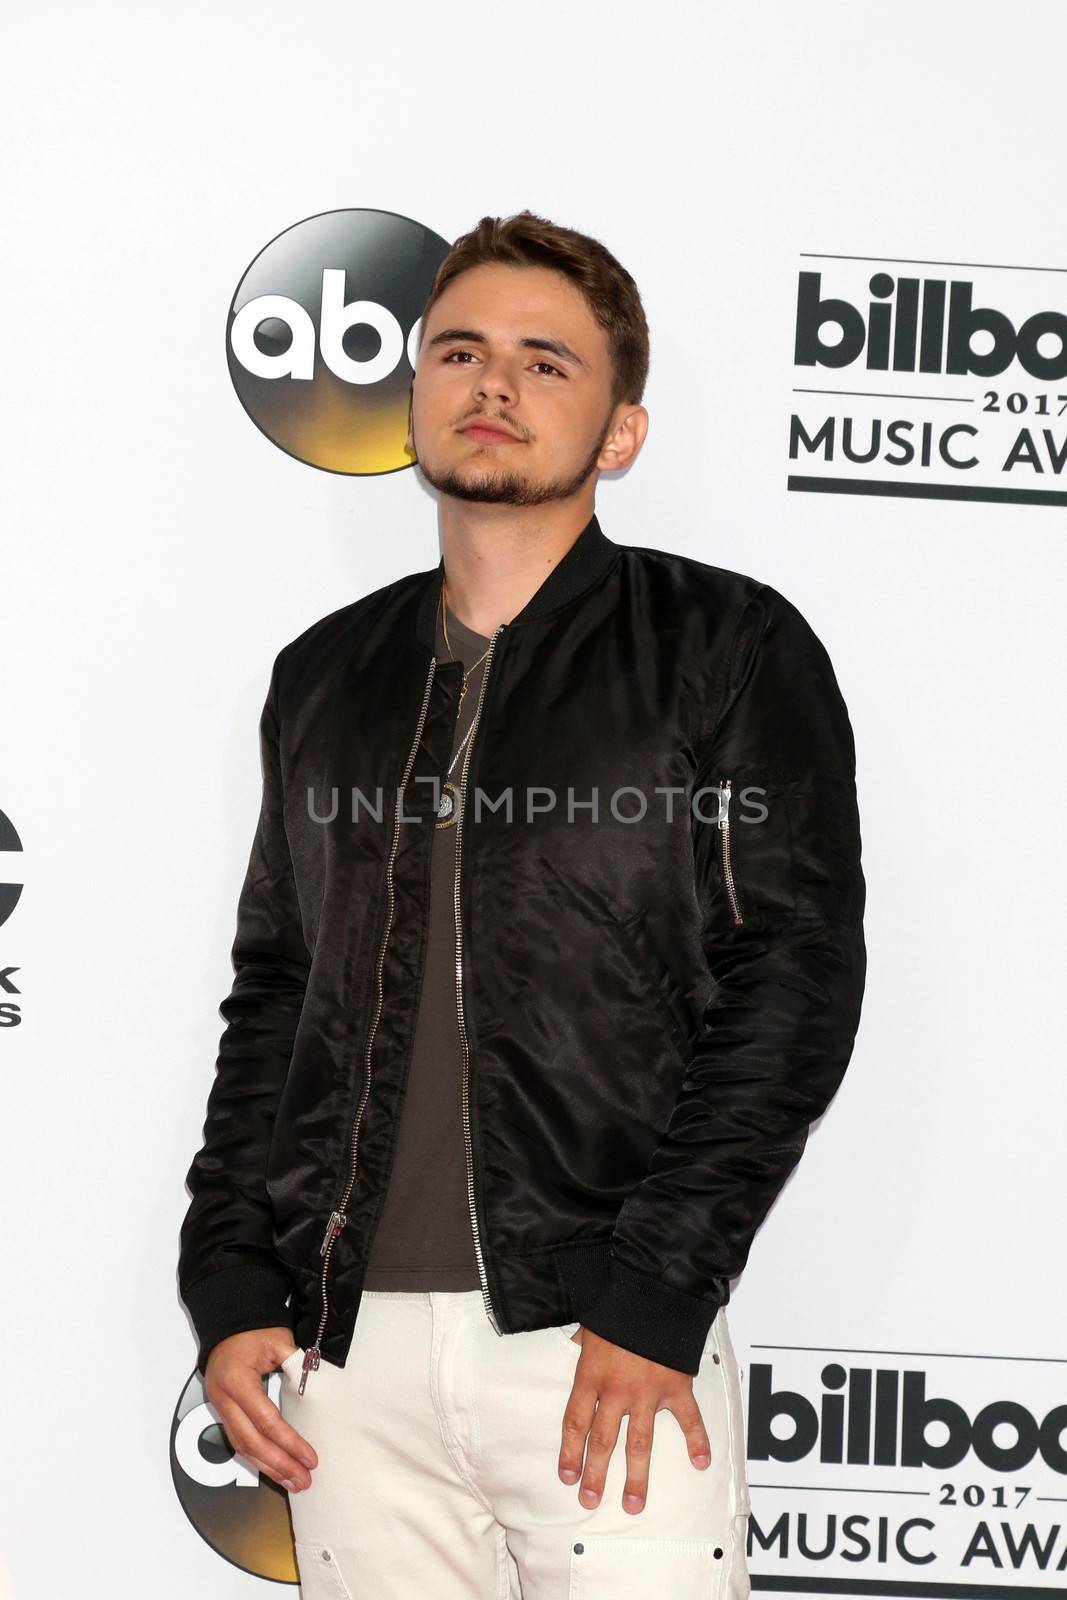 Prince Michael Jackson
at the 2017 Billboard Awards Press Room, T-Mobile Arena, Las Vegas, NV 05-21-17/ImageCollect by ImageCollect